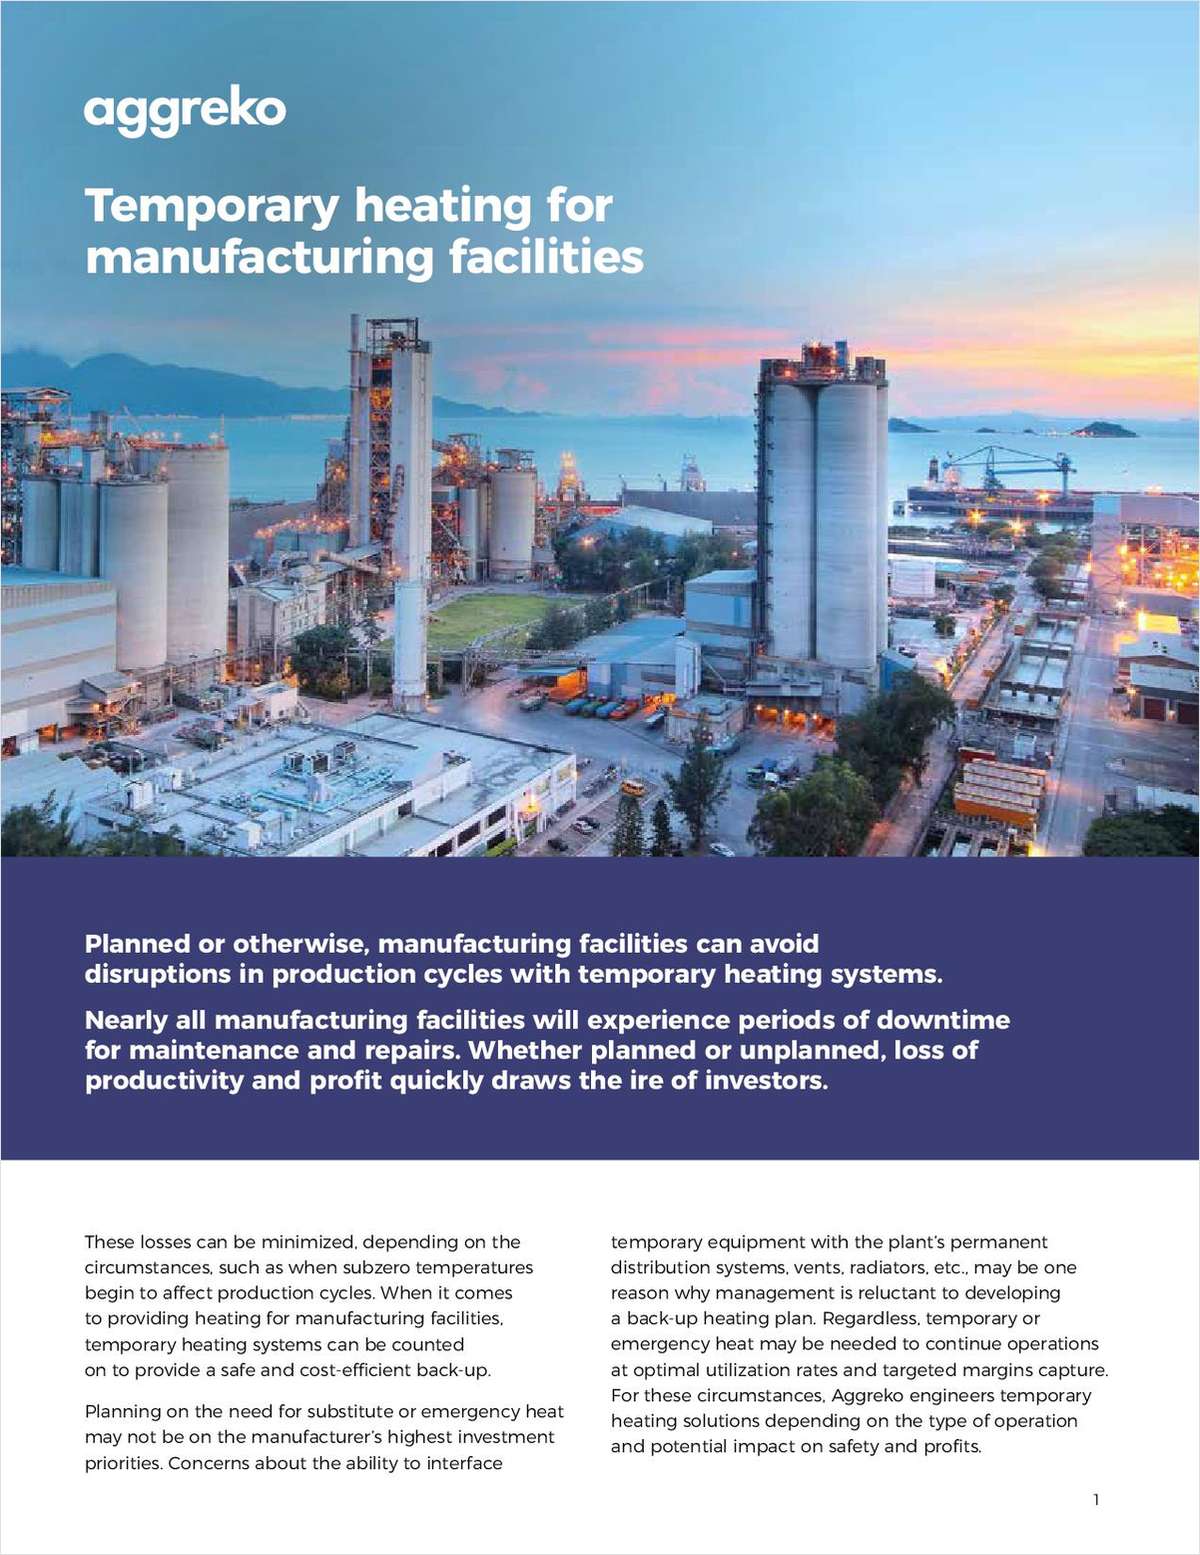 Temporary Heating for Manufacturing Facilities